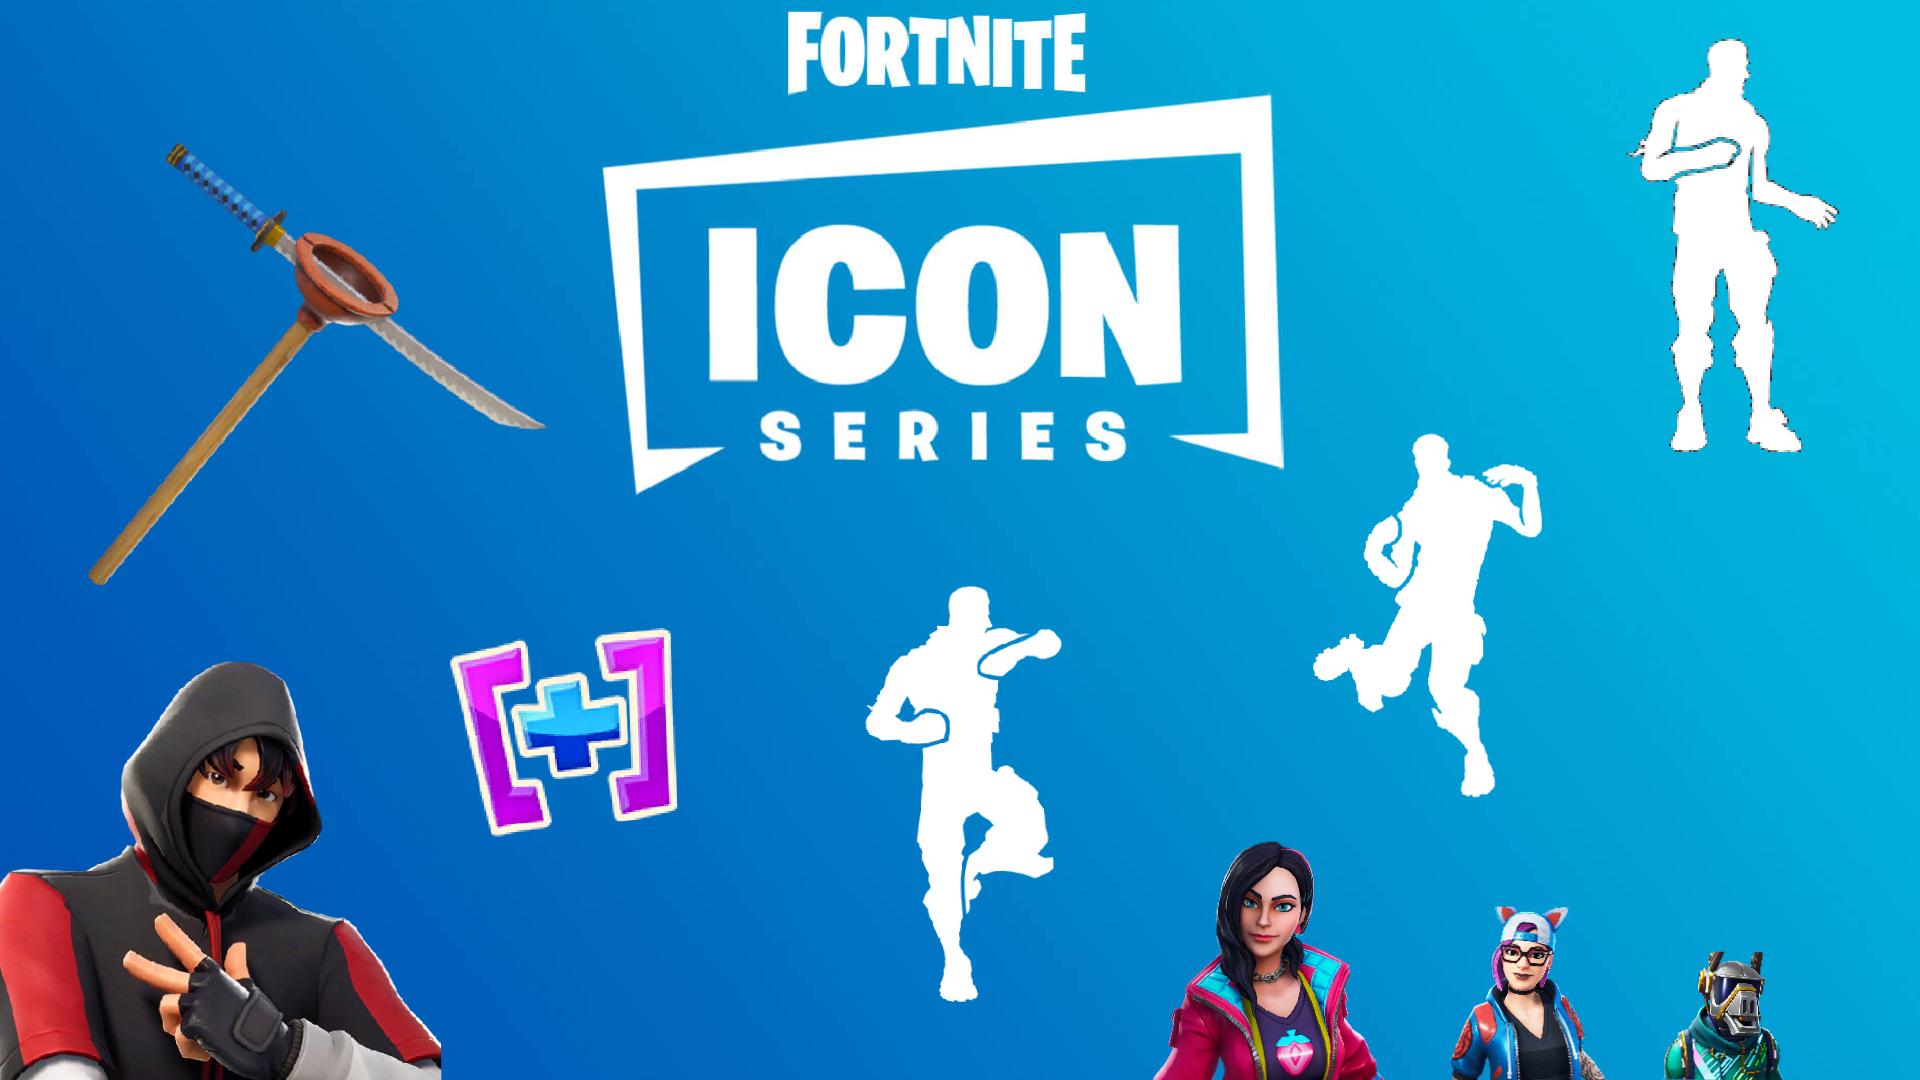 Make every cosmetic shown in the image below apart of the Icon Series